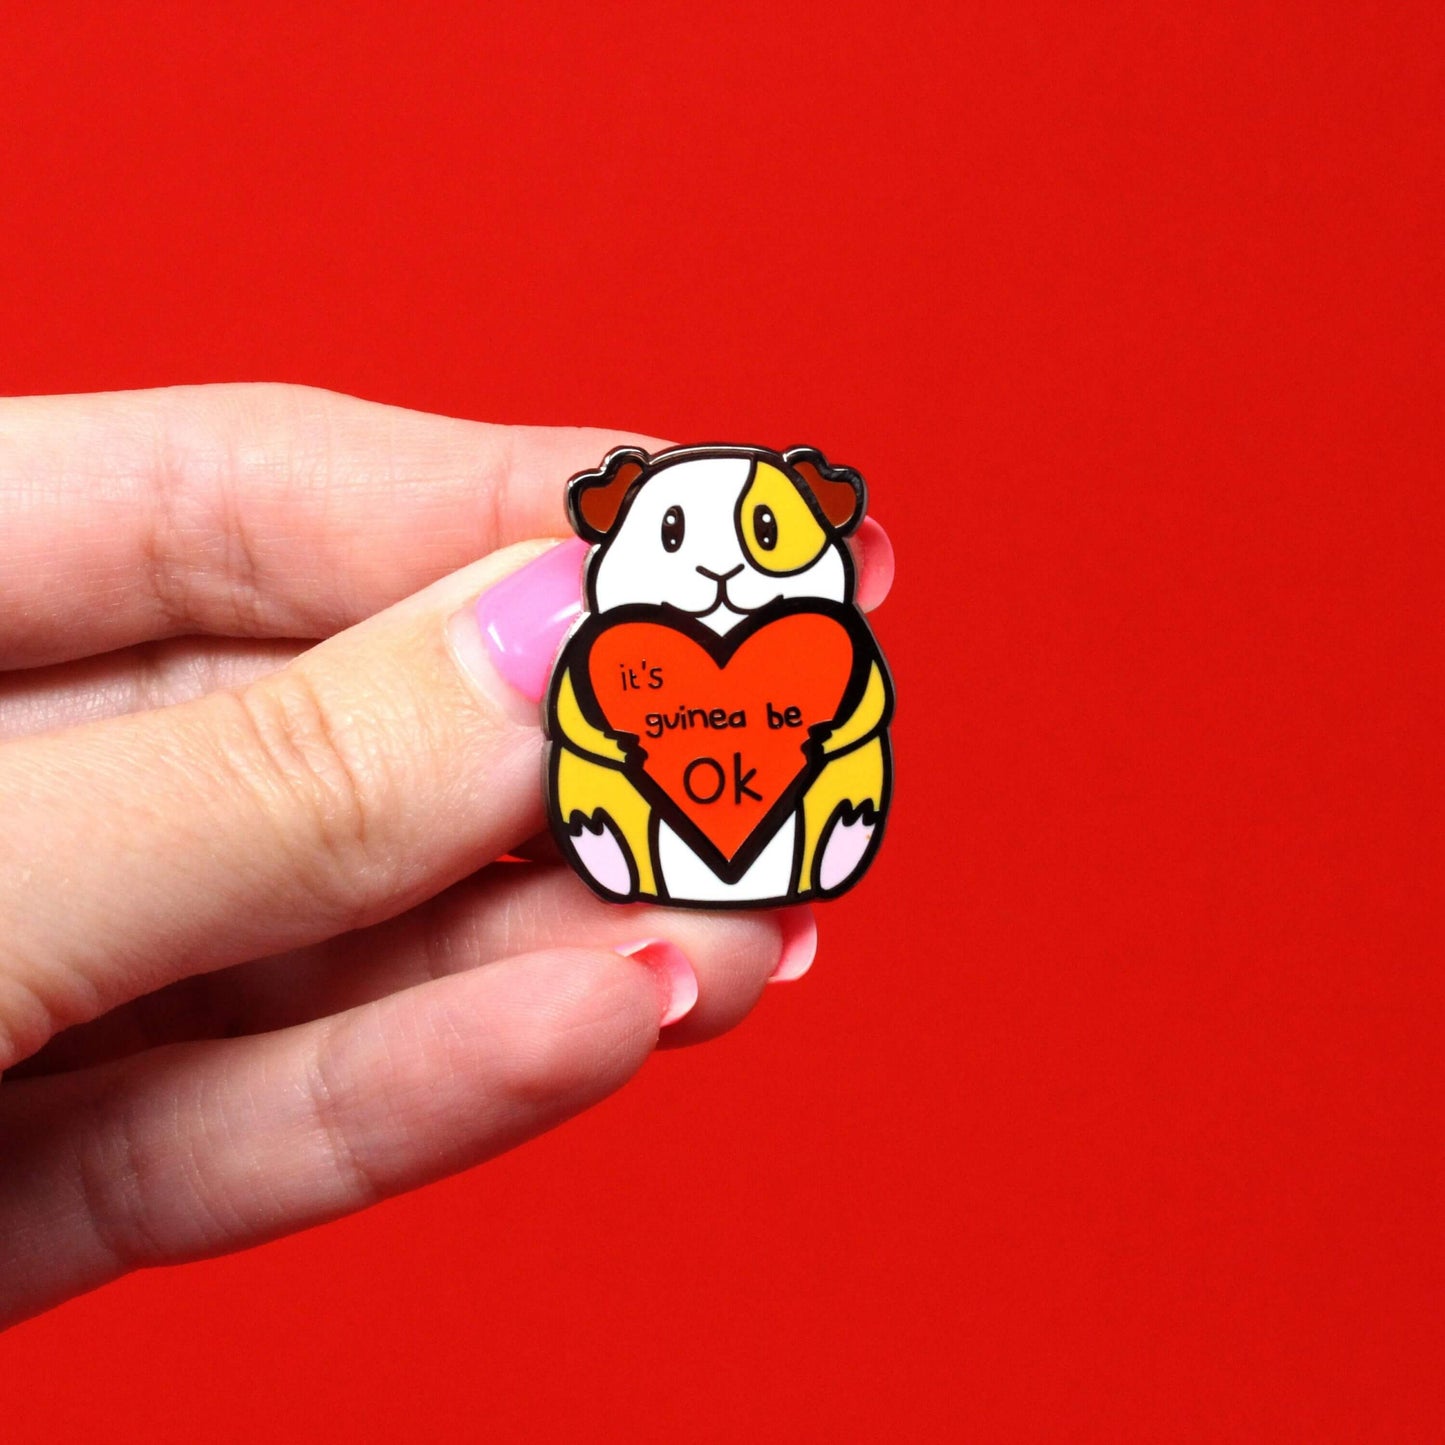 Guinea Pig Mental Health Enamel Pin shown held in front of a red background. The enamel pin is of a smiling guinea pig holding a big red heart with the text it's guinea be ok inside. The enamel pin is deigned to raise awareness for mental health.